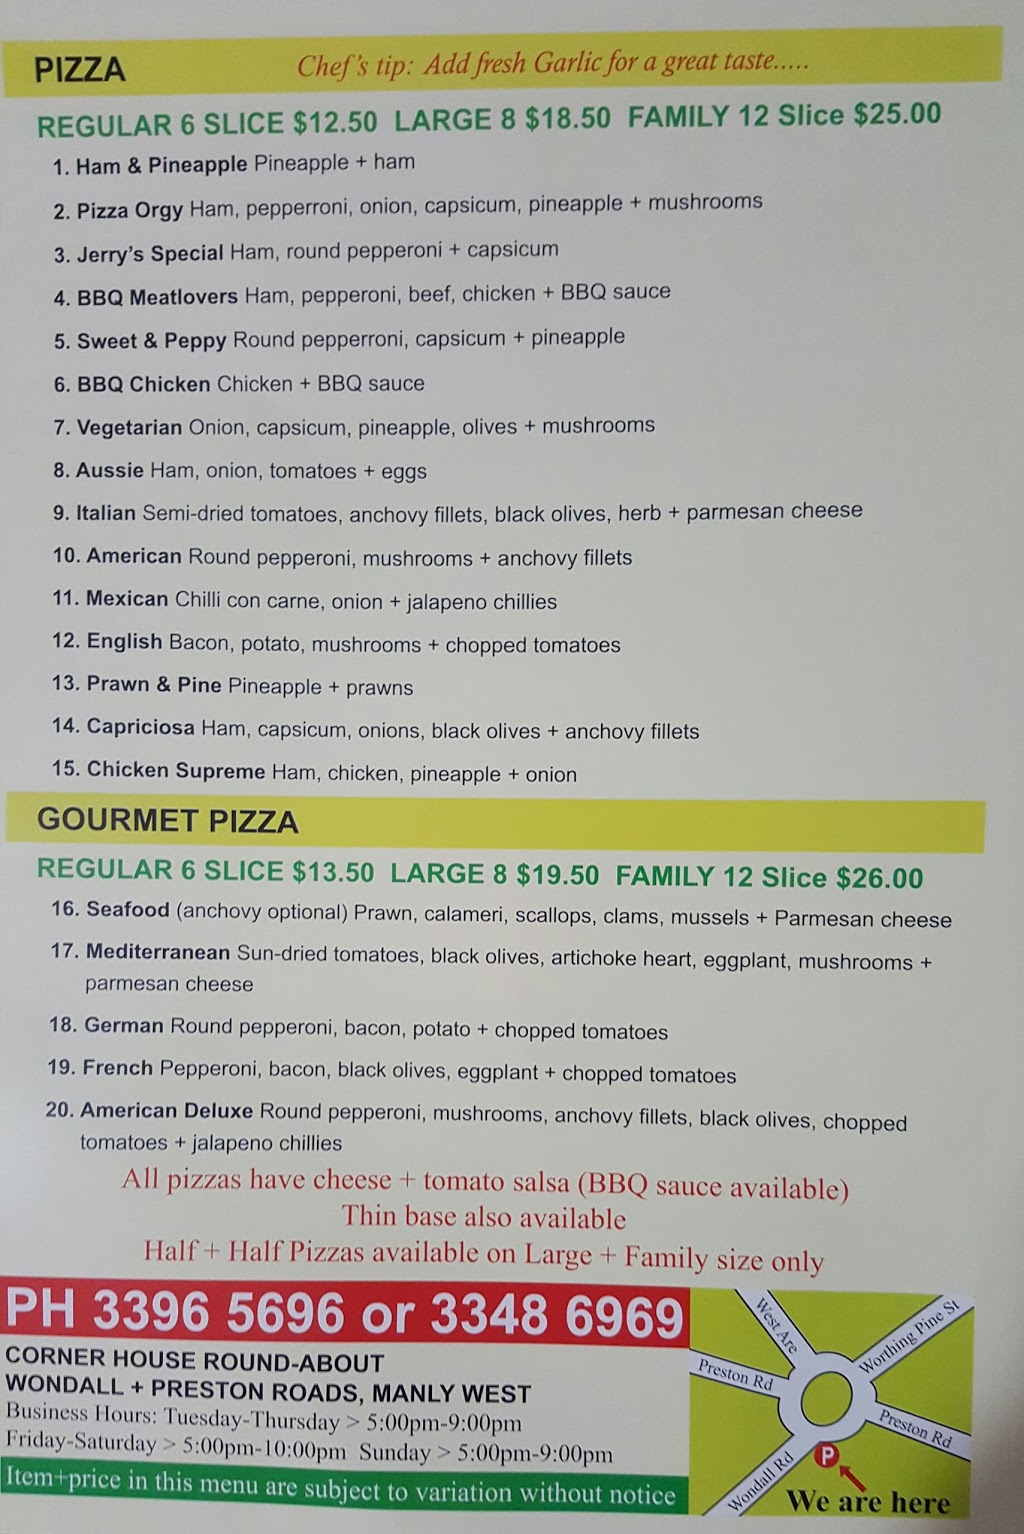 Pizzaland Manly West | meal delivery | 6/212 Preston Rd, Manly West QLD 4179, Australia | 0733965696 OR +61 7 3396 5696